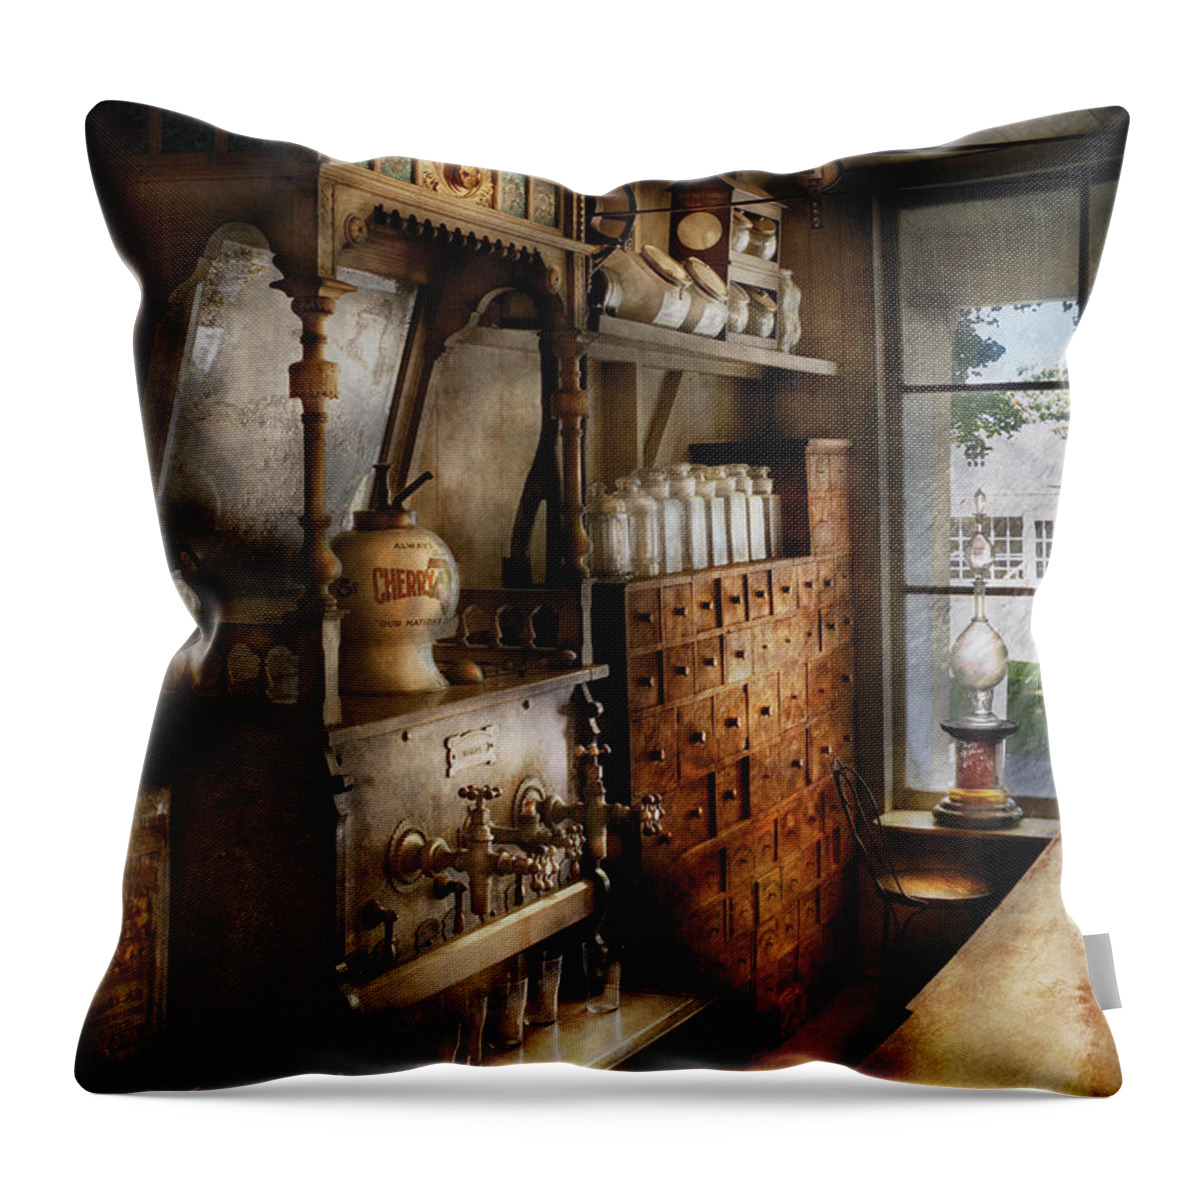 Savad Throw Pillow featuring the photograph Store - Turn of the century soda fountain by Mike Savad